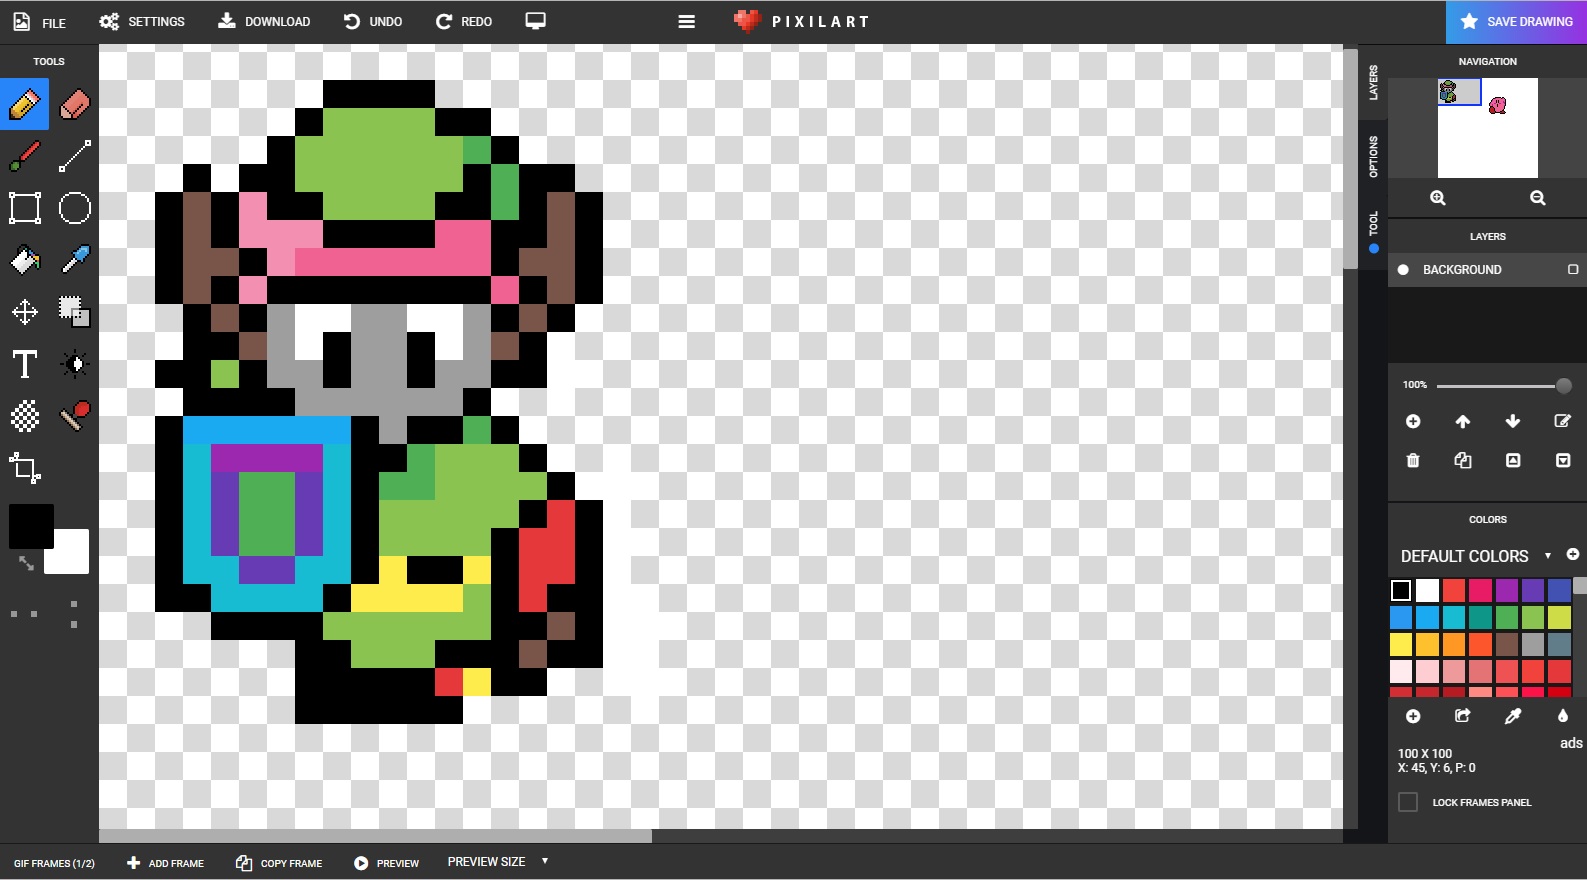 hello everyone, i'm struggling to do this pixel art with SC and can't seem  to find any tutorials to help me since every one shows how to change color  before your turn